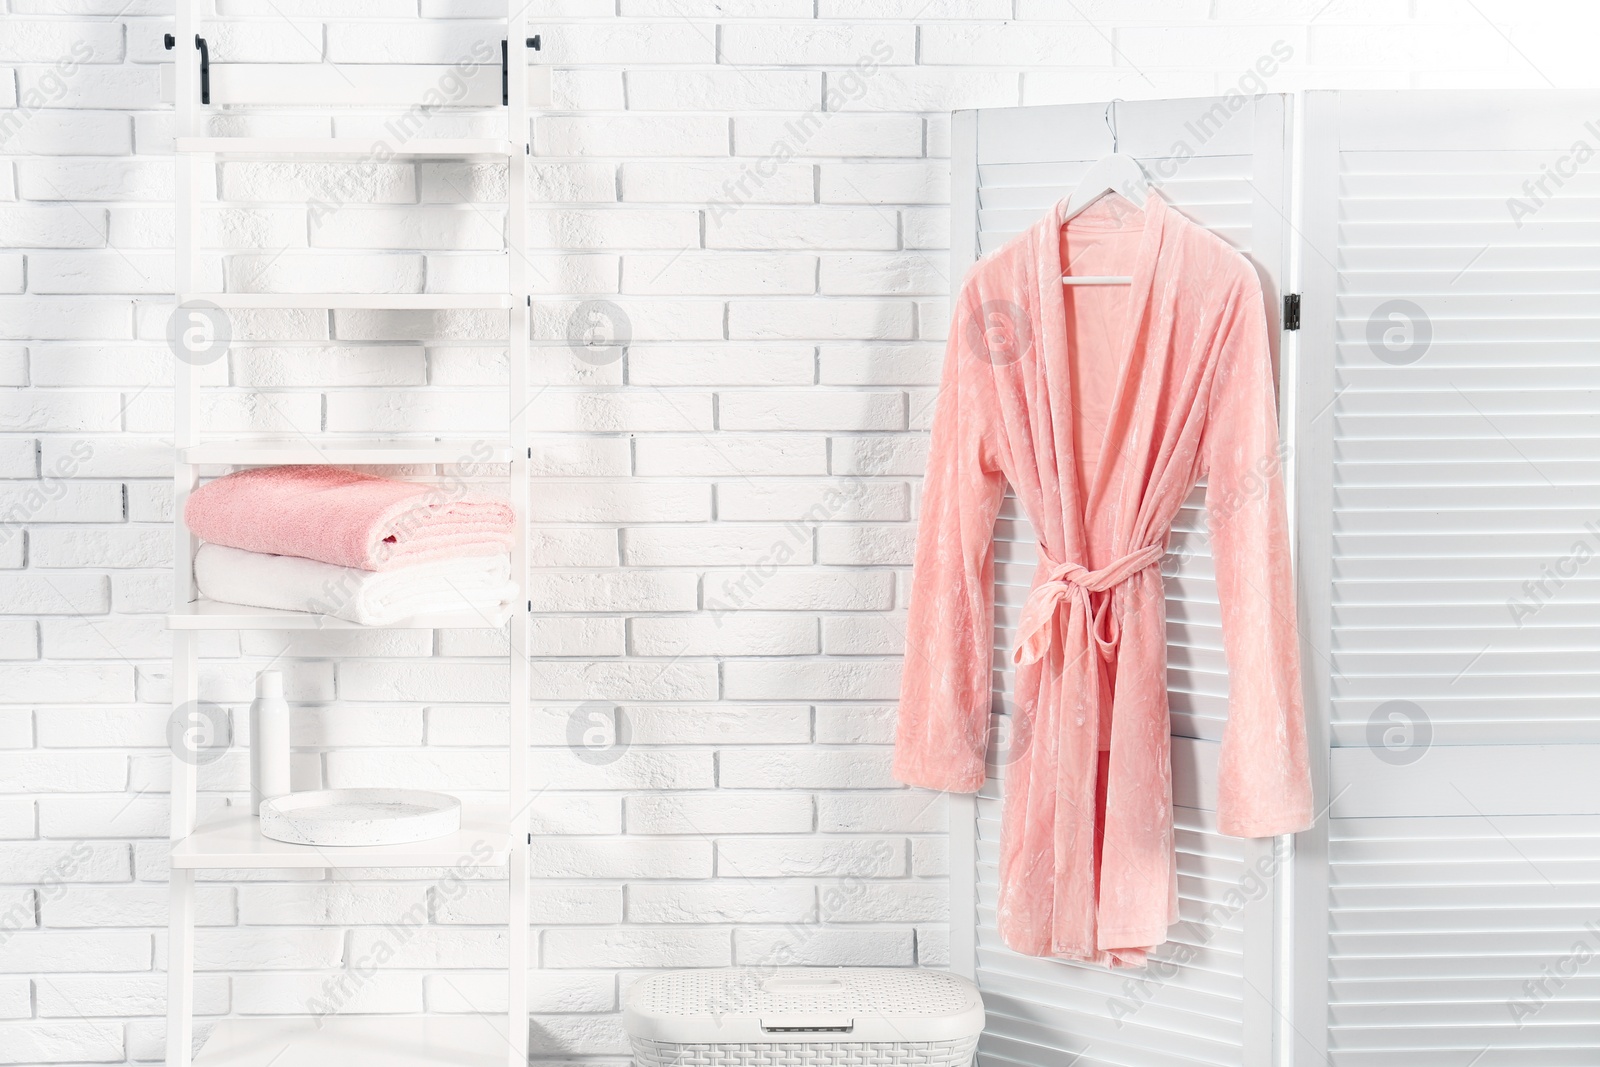 Photo of Shelving unit with clean towels and robe near brick wall